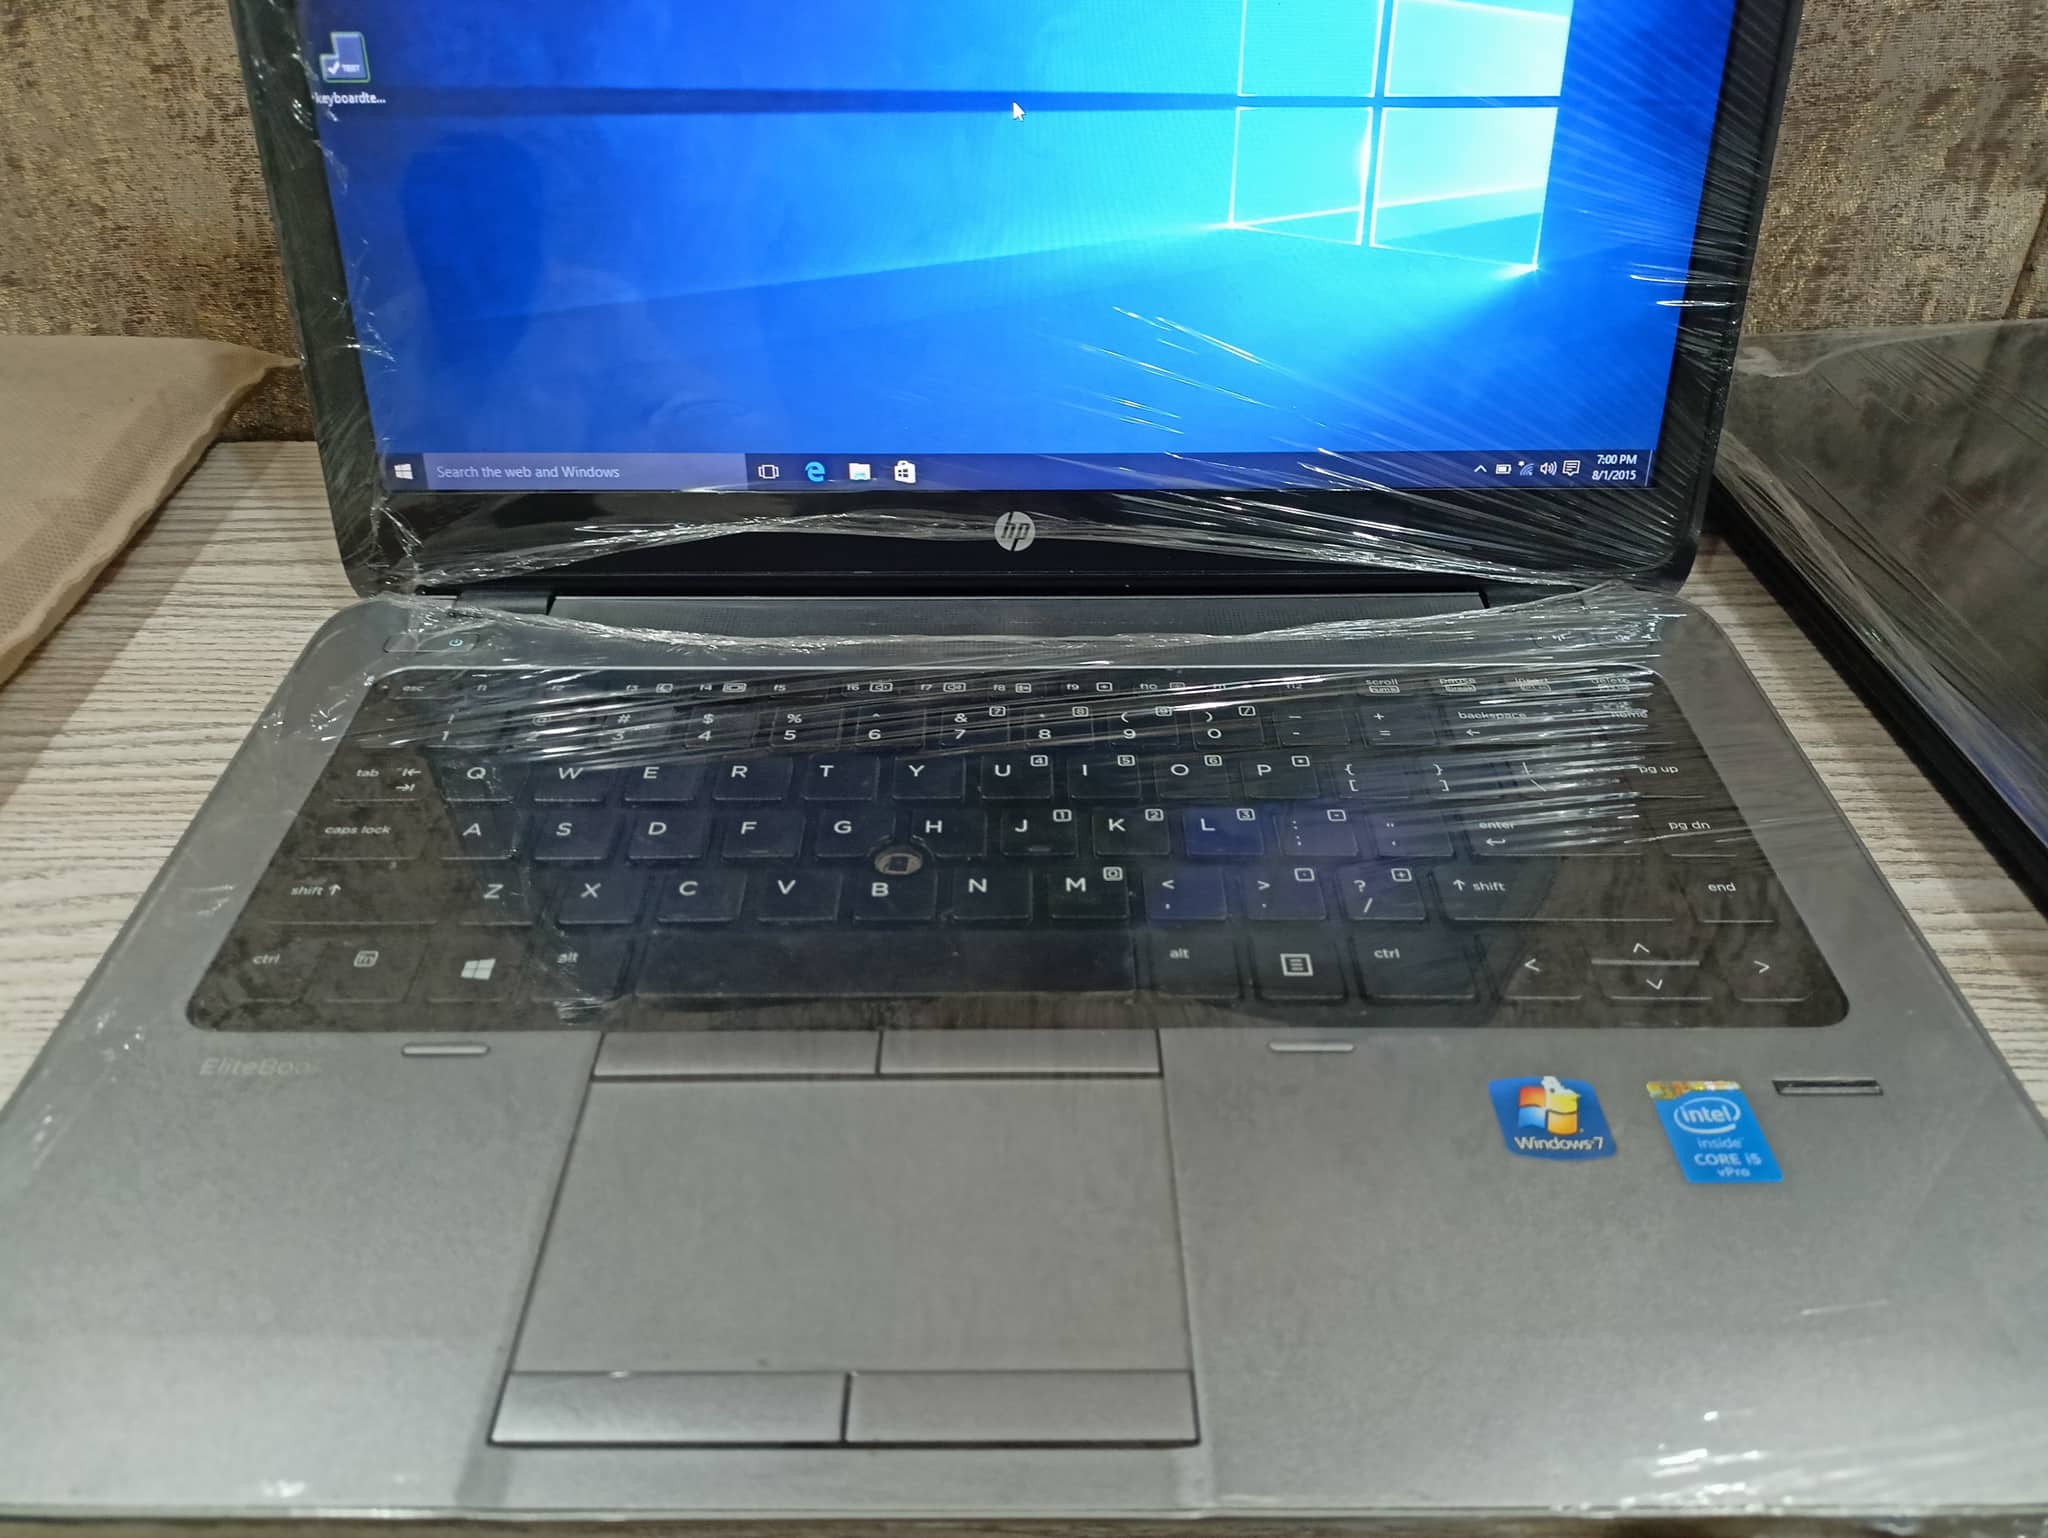 Hp Elitebook 840 G1 Core i5 4th Generation Awesome Slim Graphics Laptop